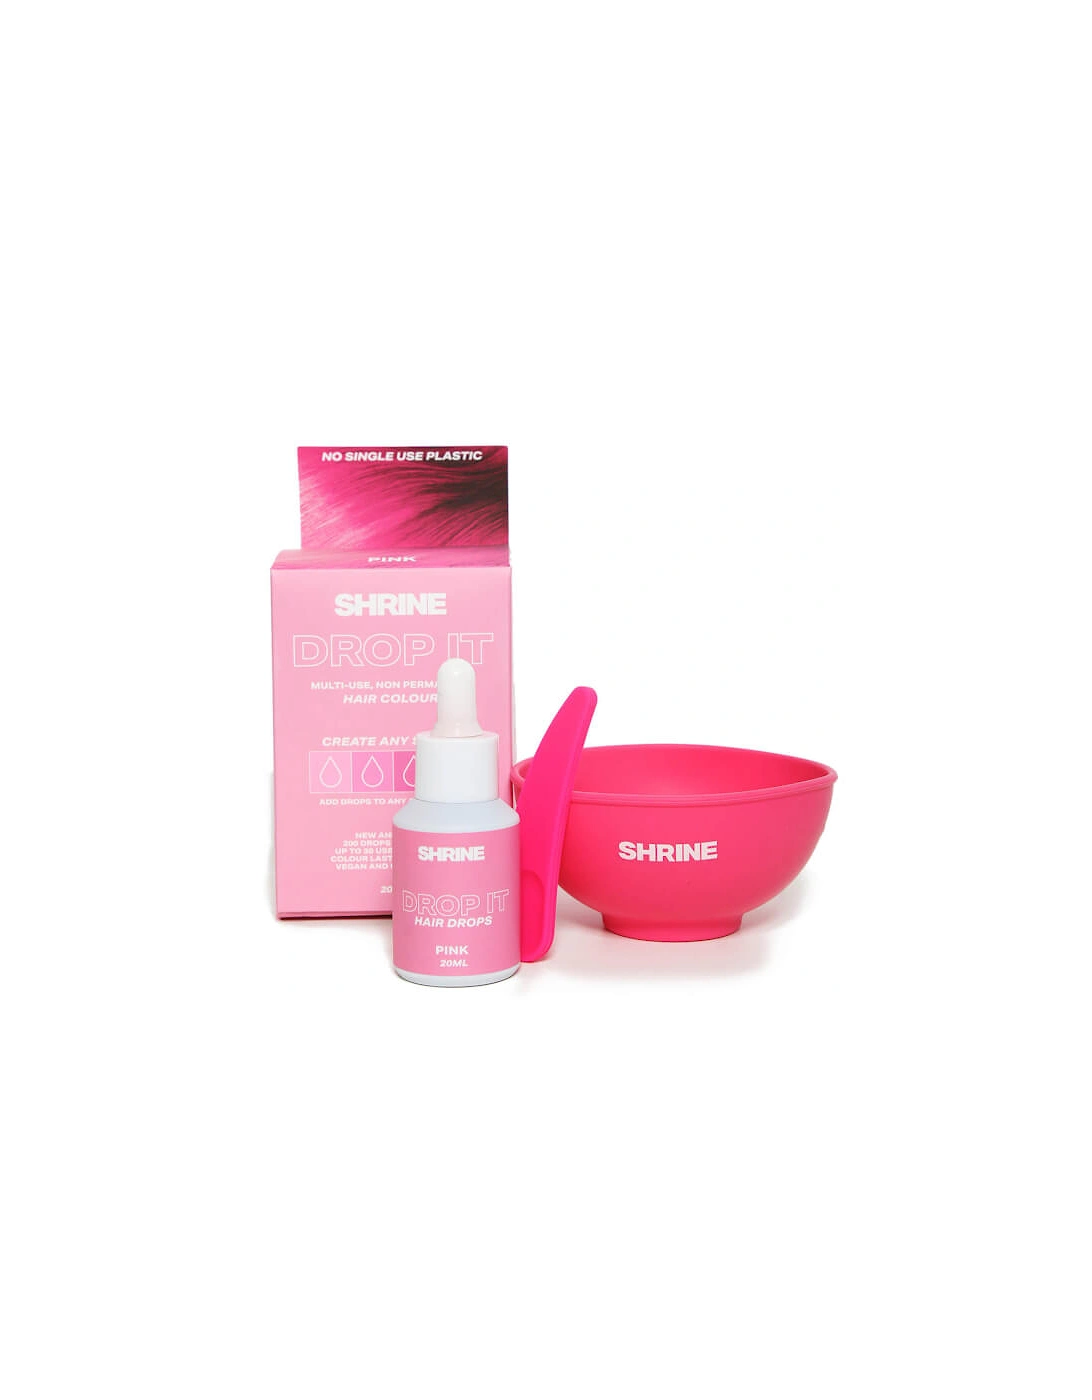 Drop It Hair Colourant - Pink 20ml, 2 of 1